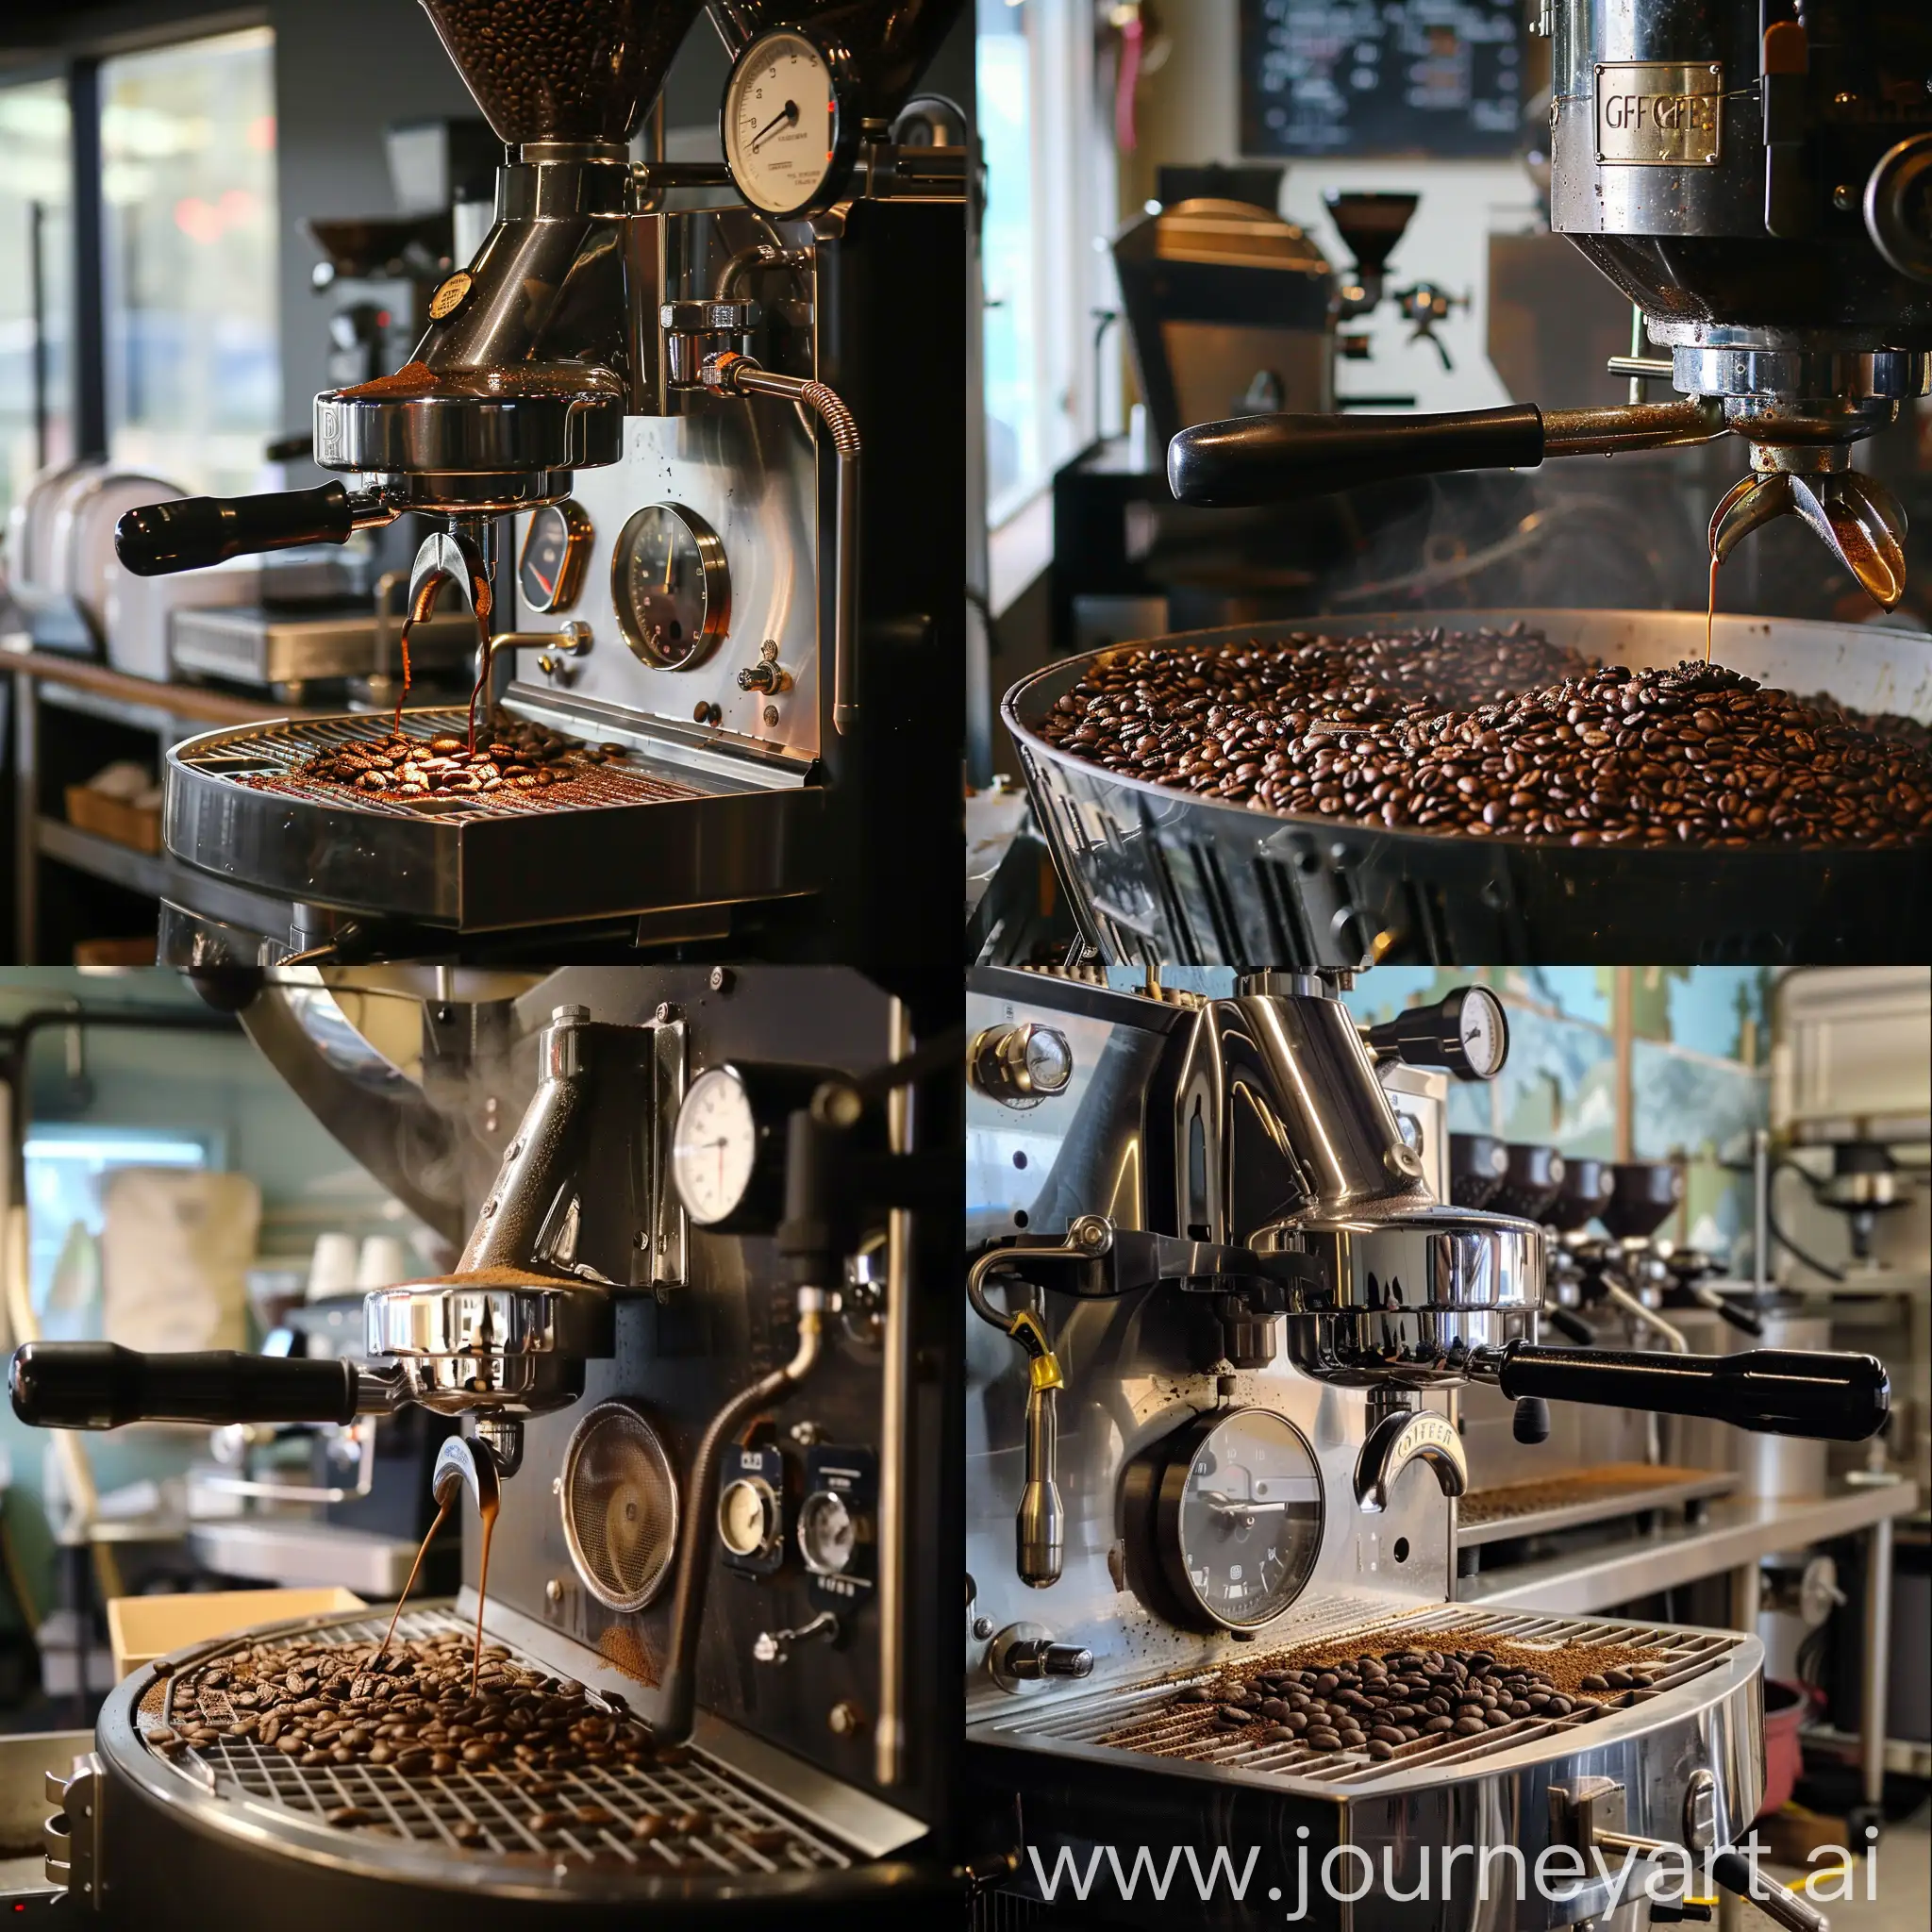 Artisanal-Coffee-Roaster-in-Action